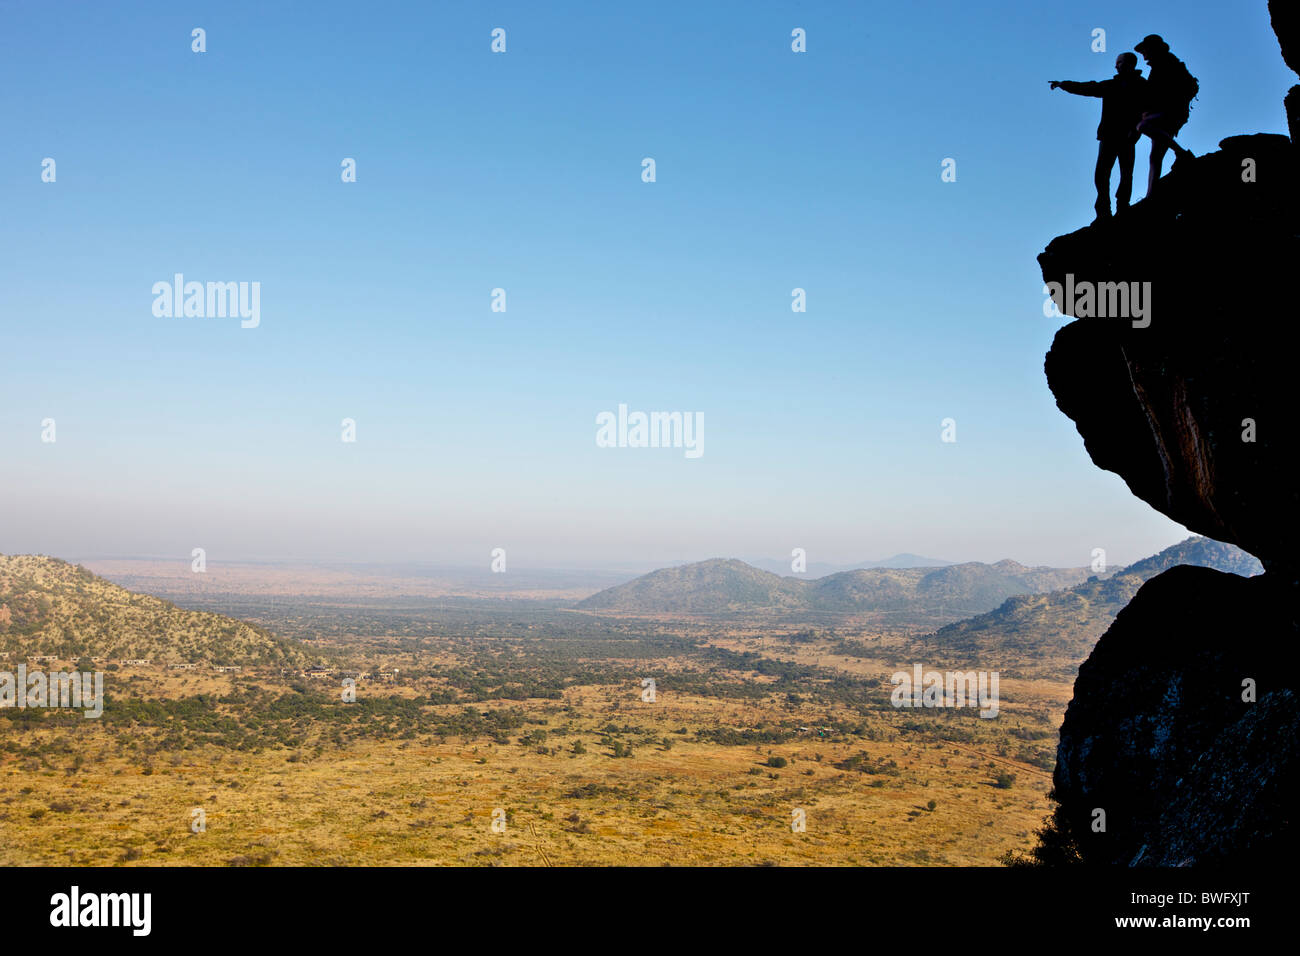 Climbers standing on a cliff looking out onto an open landscape Stock Photo